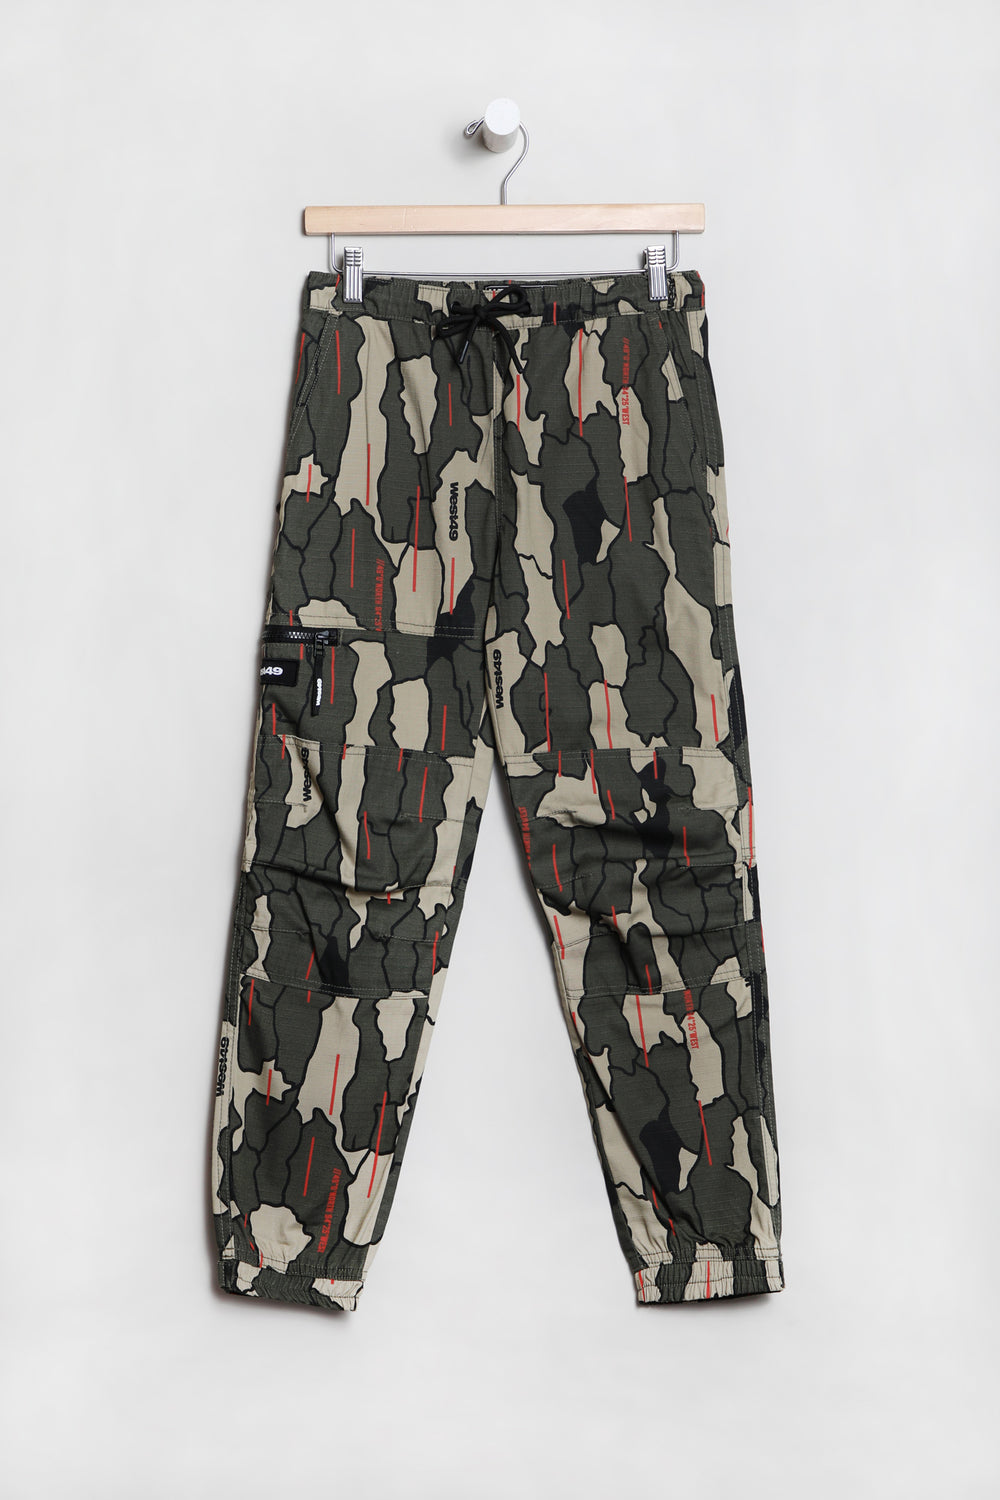 Jogger Ripstop Camouflage Montagne West49 Junior Camoufle